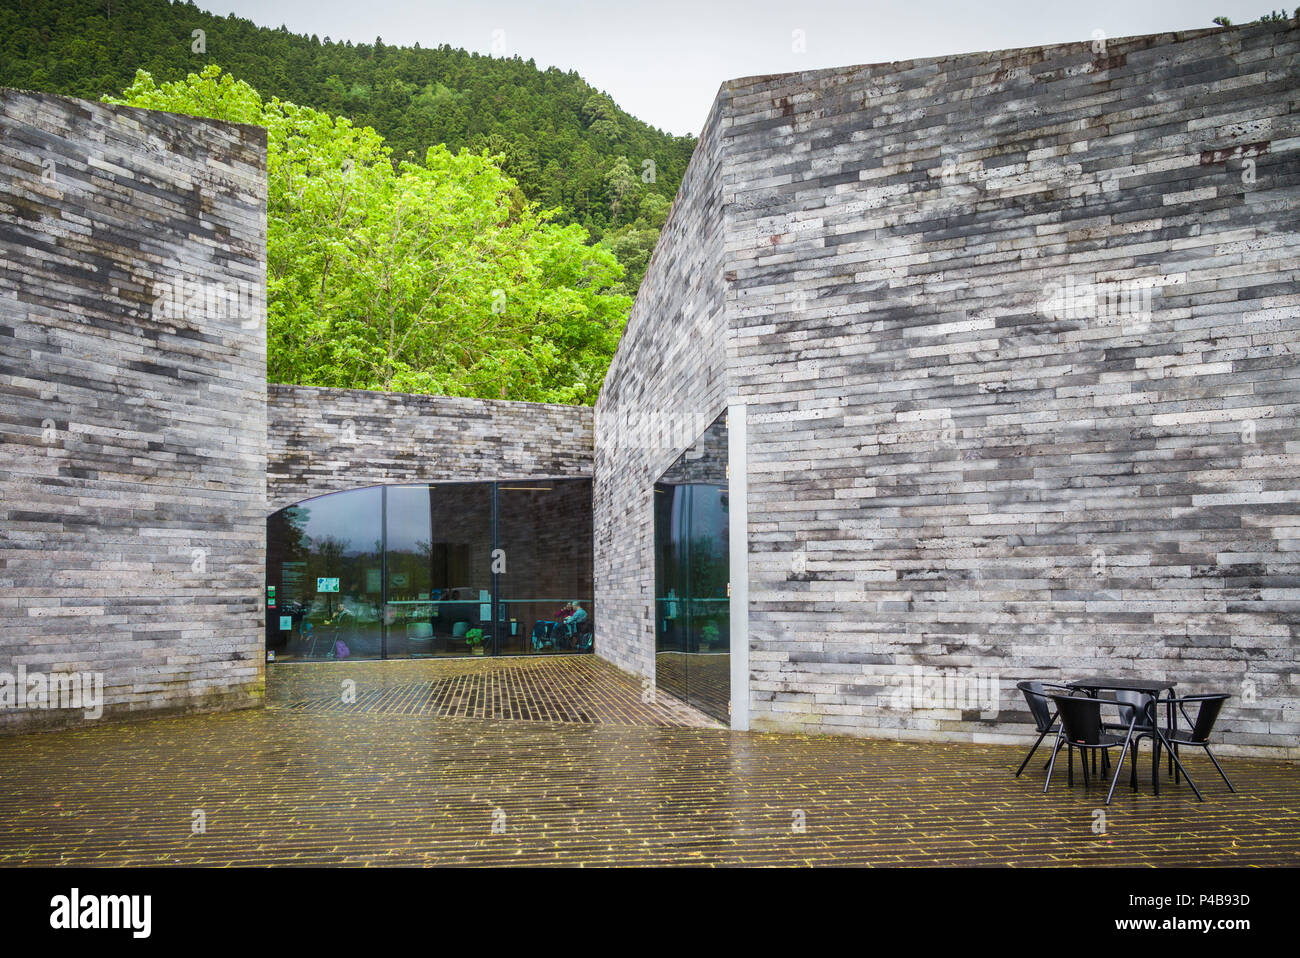 Portugal, Azores, Sao Miguel Island, Furnas, Lago das Furnas lake, Furnas Monitoring and Research Centre, lake monitoring buildings by architects Aires Mateus and Associates, exterior Stock Photo